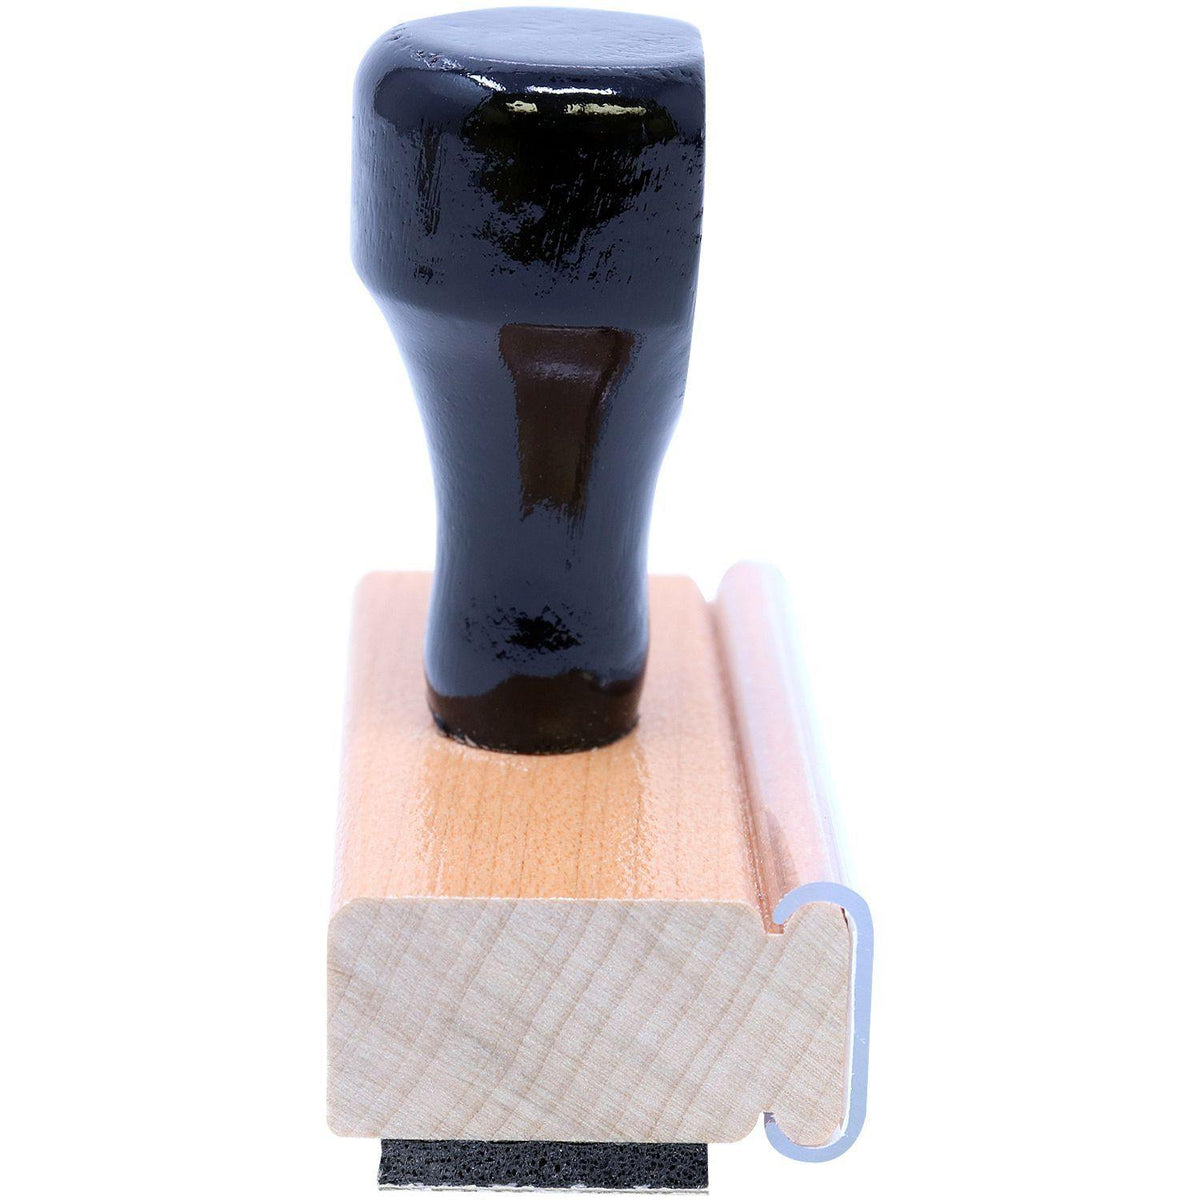 Round Check Your Work Rubber Stamp - Engineer Seal Stamps - Brand_Acorn, Impression Size_Small, Stamp Type_Regular Stamp, Type of Use_General, Type of Use_Teacher